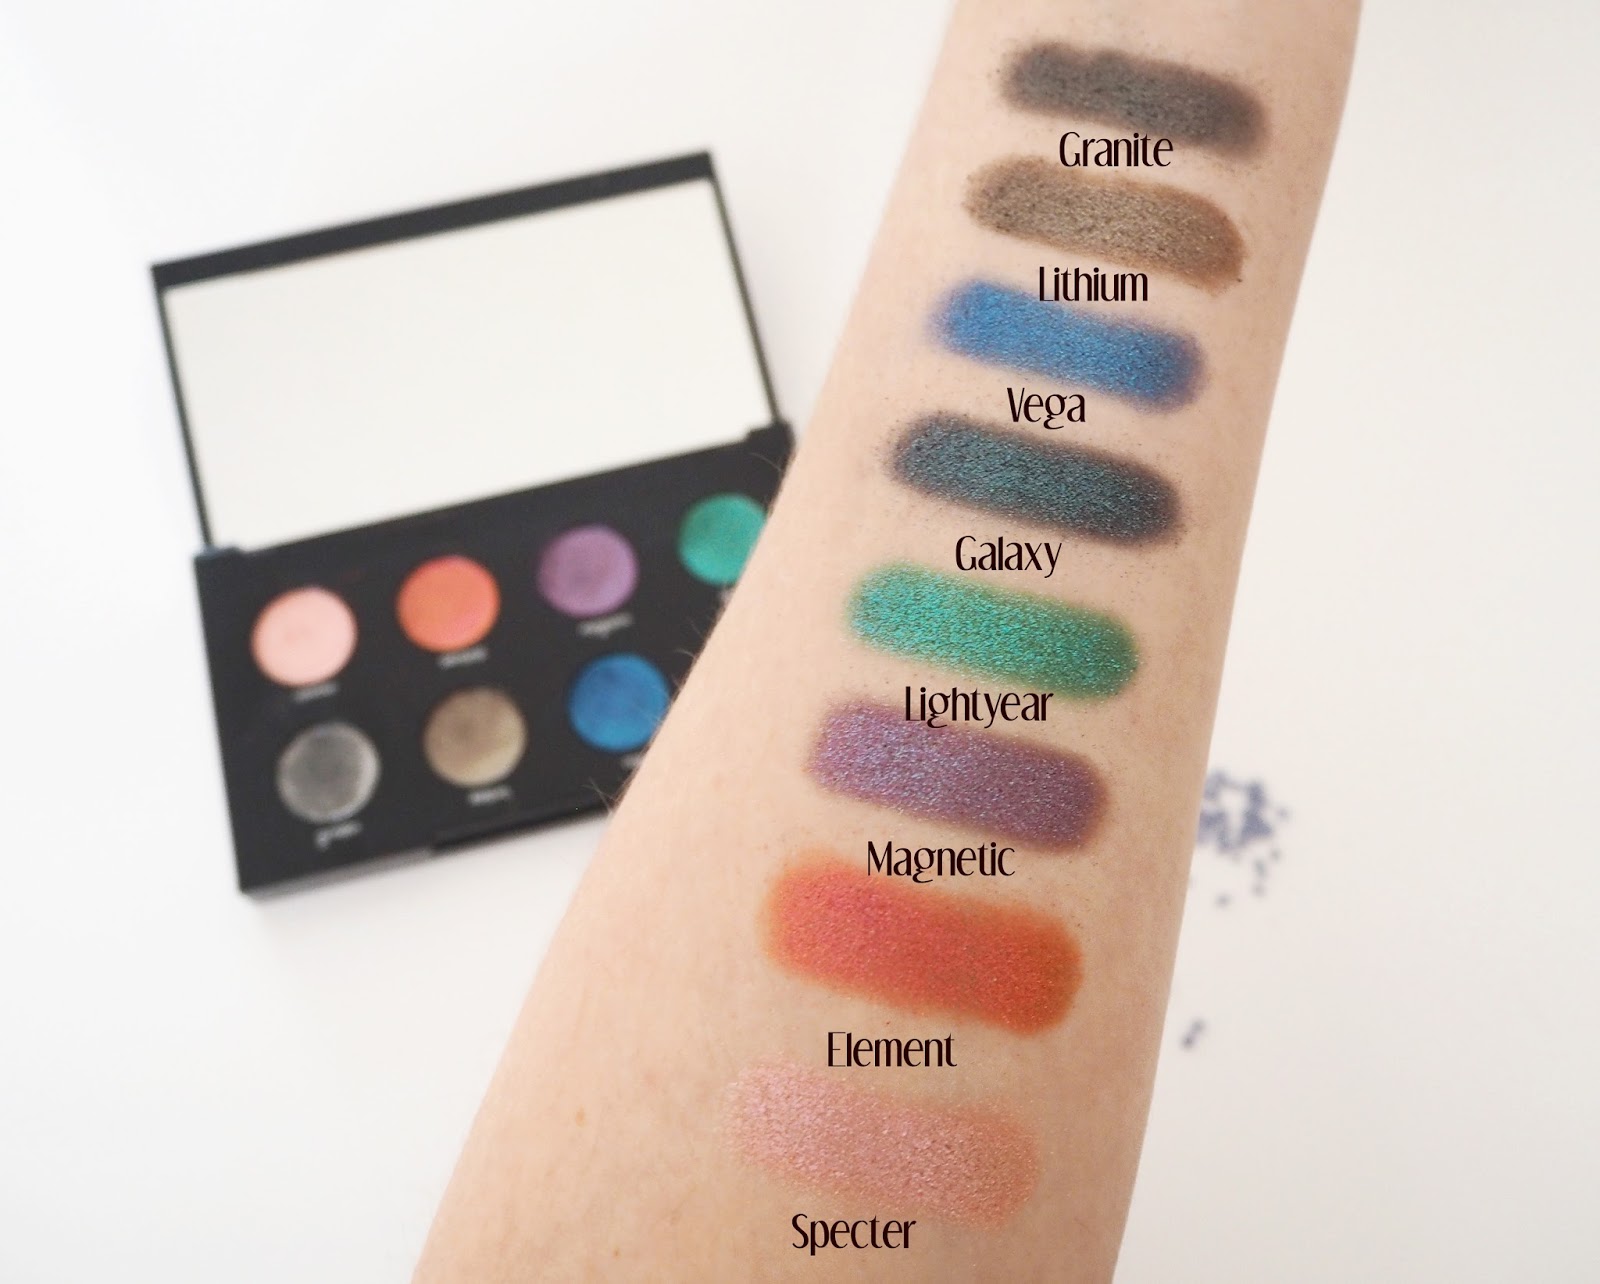 Urban Decay Moondust Palette, Swatches, Beauty Blogger, Urban Decay Review, Eye Shadow Swatches, Make Up Blogger, Make Up Review, Make Up Palette, Eye Shadow Palette, UK Blogger, 